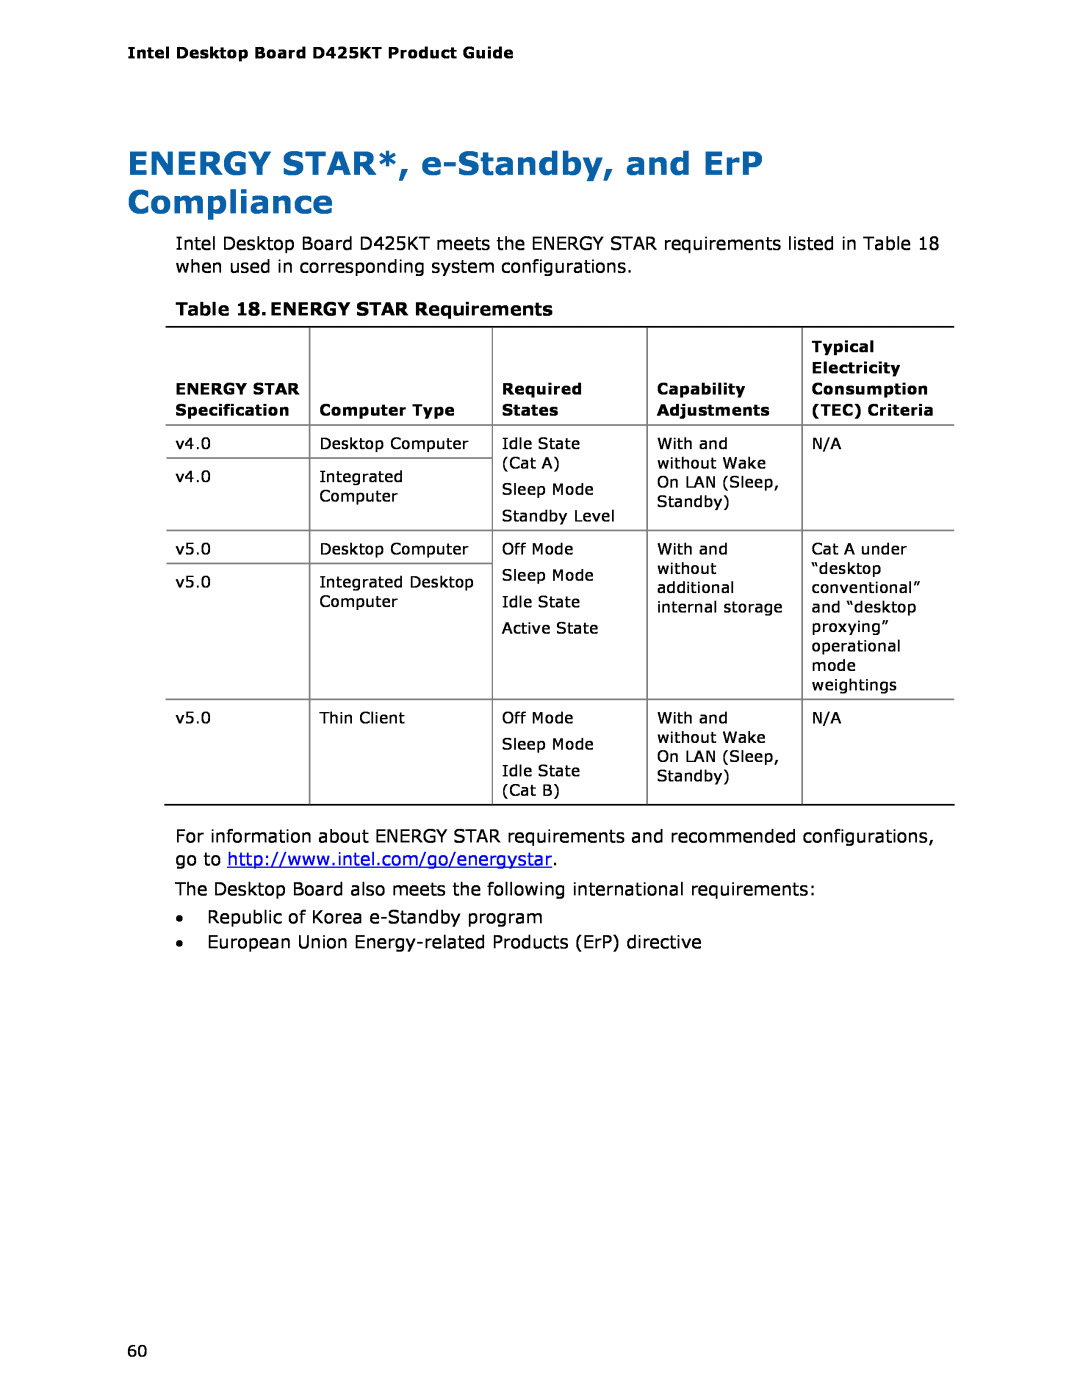 Intel D425KT manual ENERGY STAR*, e-Standby, and ErP Compliance, ENERGY STAR Requirements 